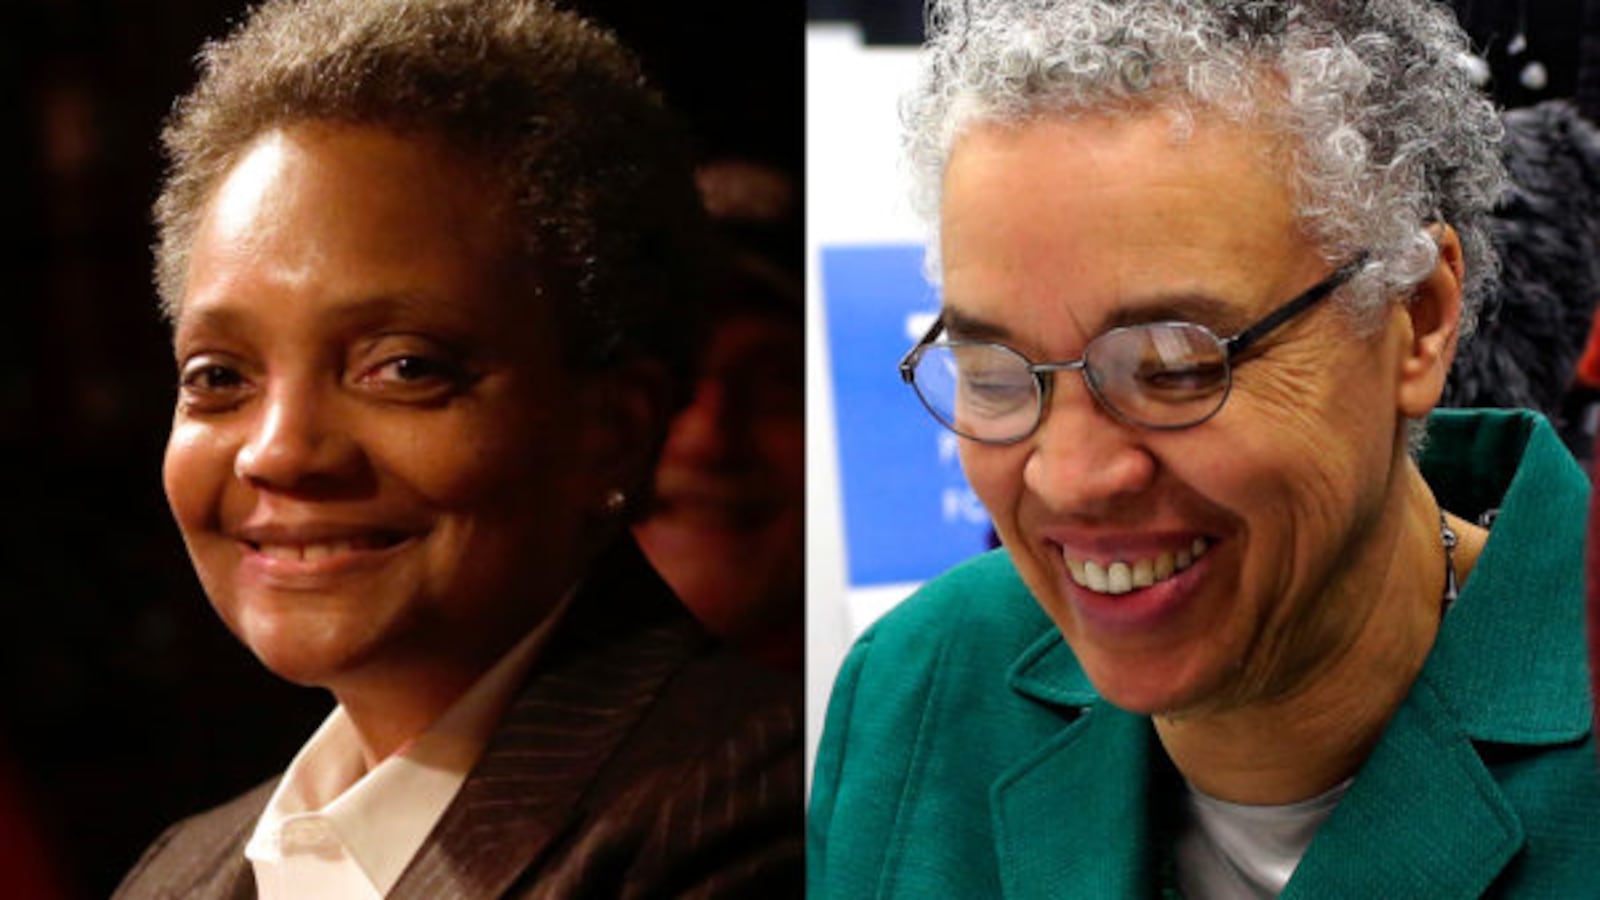 The crowded Chicago mayoral election ended in a runoff. But one thing is certain: The nation’s third-largest city will make history by electing its first black female mayor. The landmark election comes as city’s black population is shrinking rapidly and neither of the top candidates — Lori Lightfoot and Toni Preckwinkle — won the black vote. The election result raises many questions about how Chicago is changing, showing a disdain for long-ruling Machine politics and a strong desire for policing